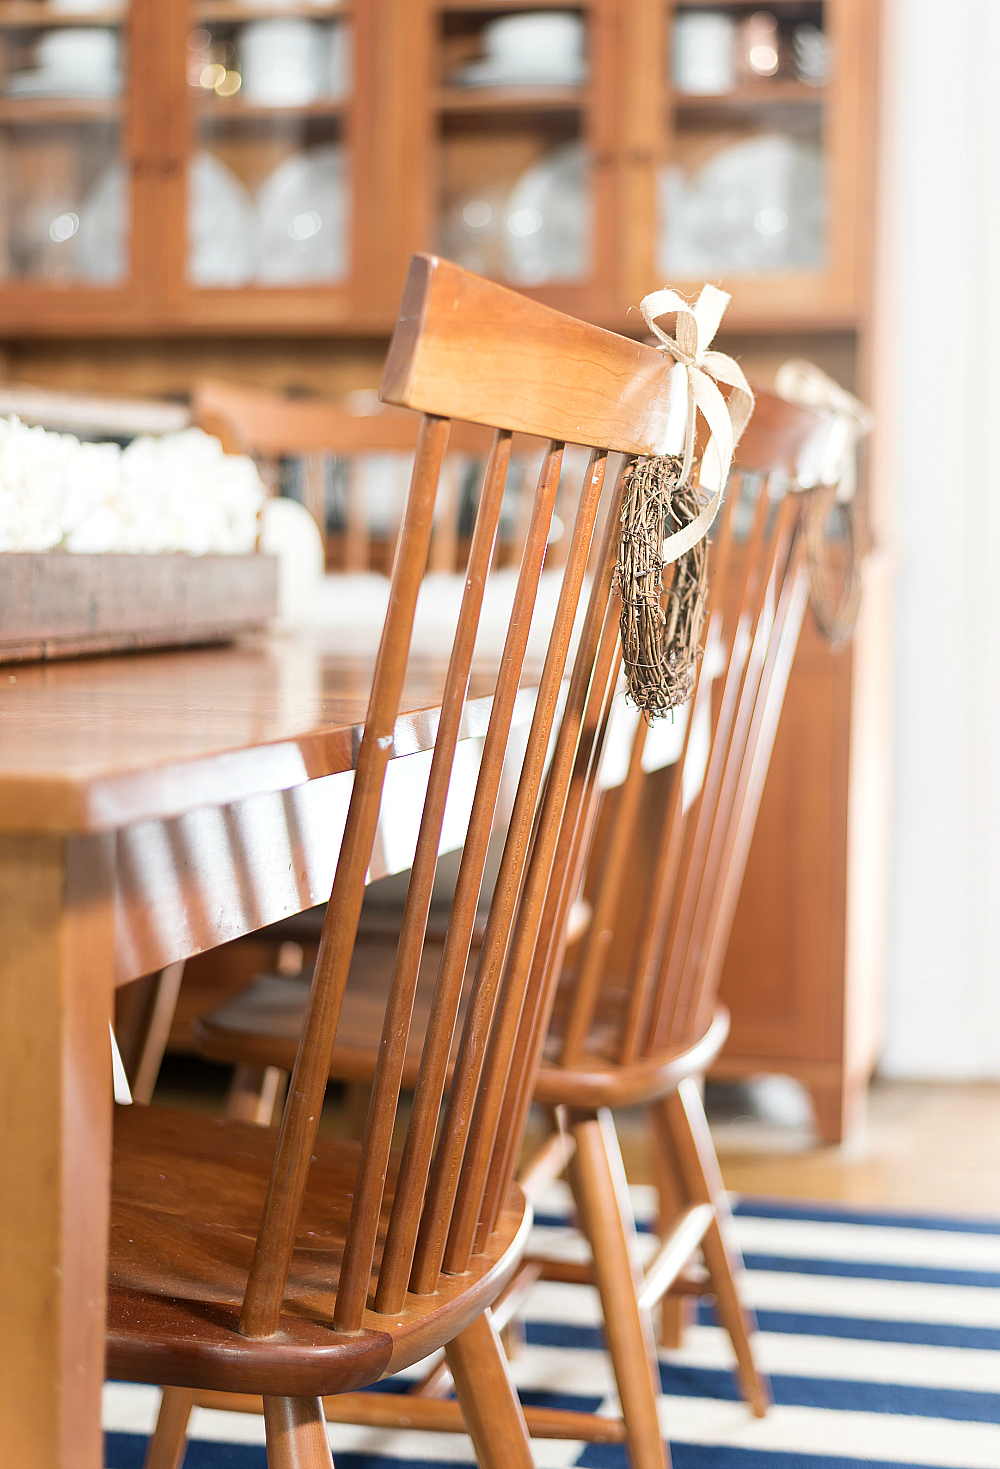 Mini Twig Wreaths on Dining Room Chairs